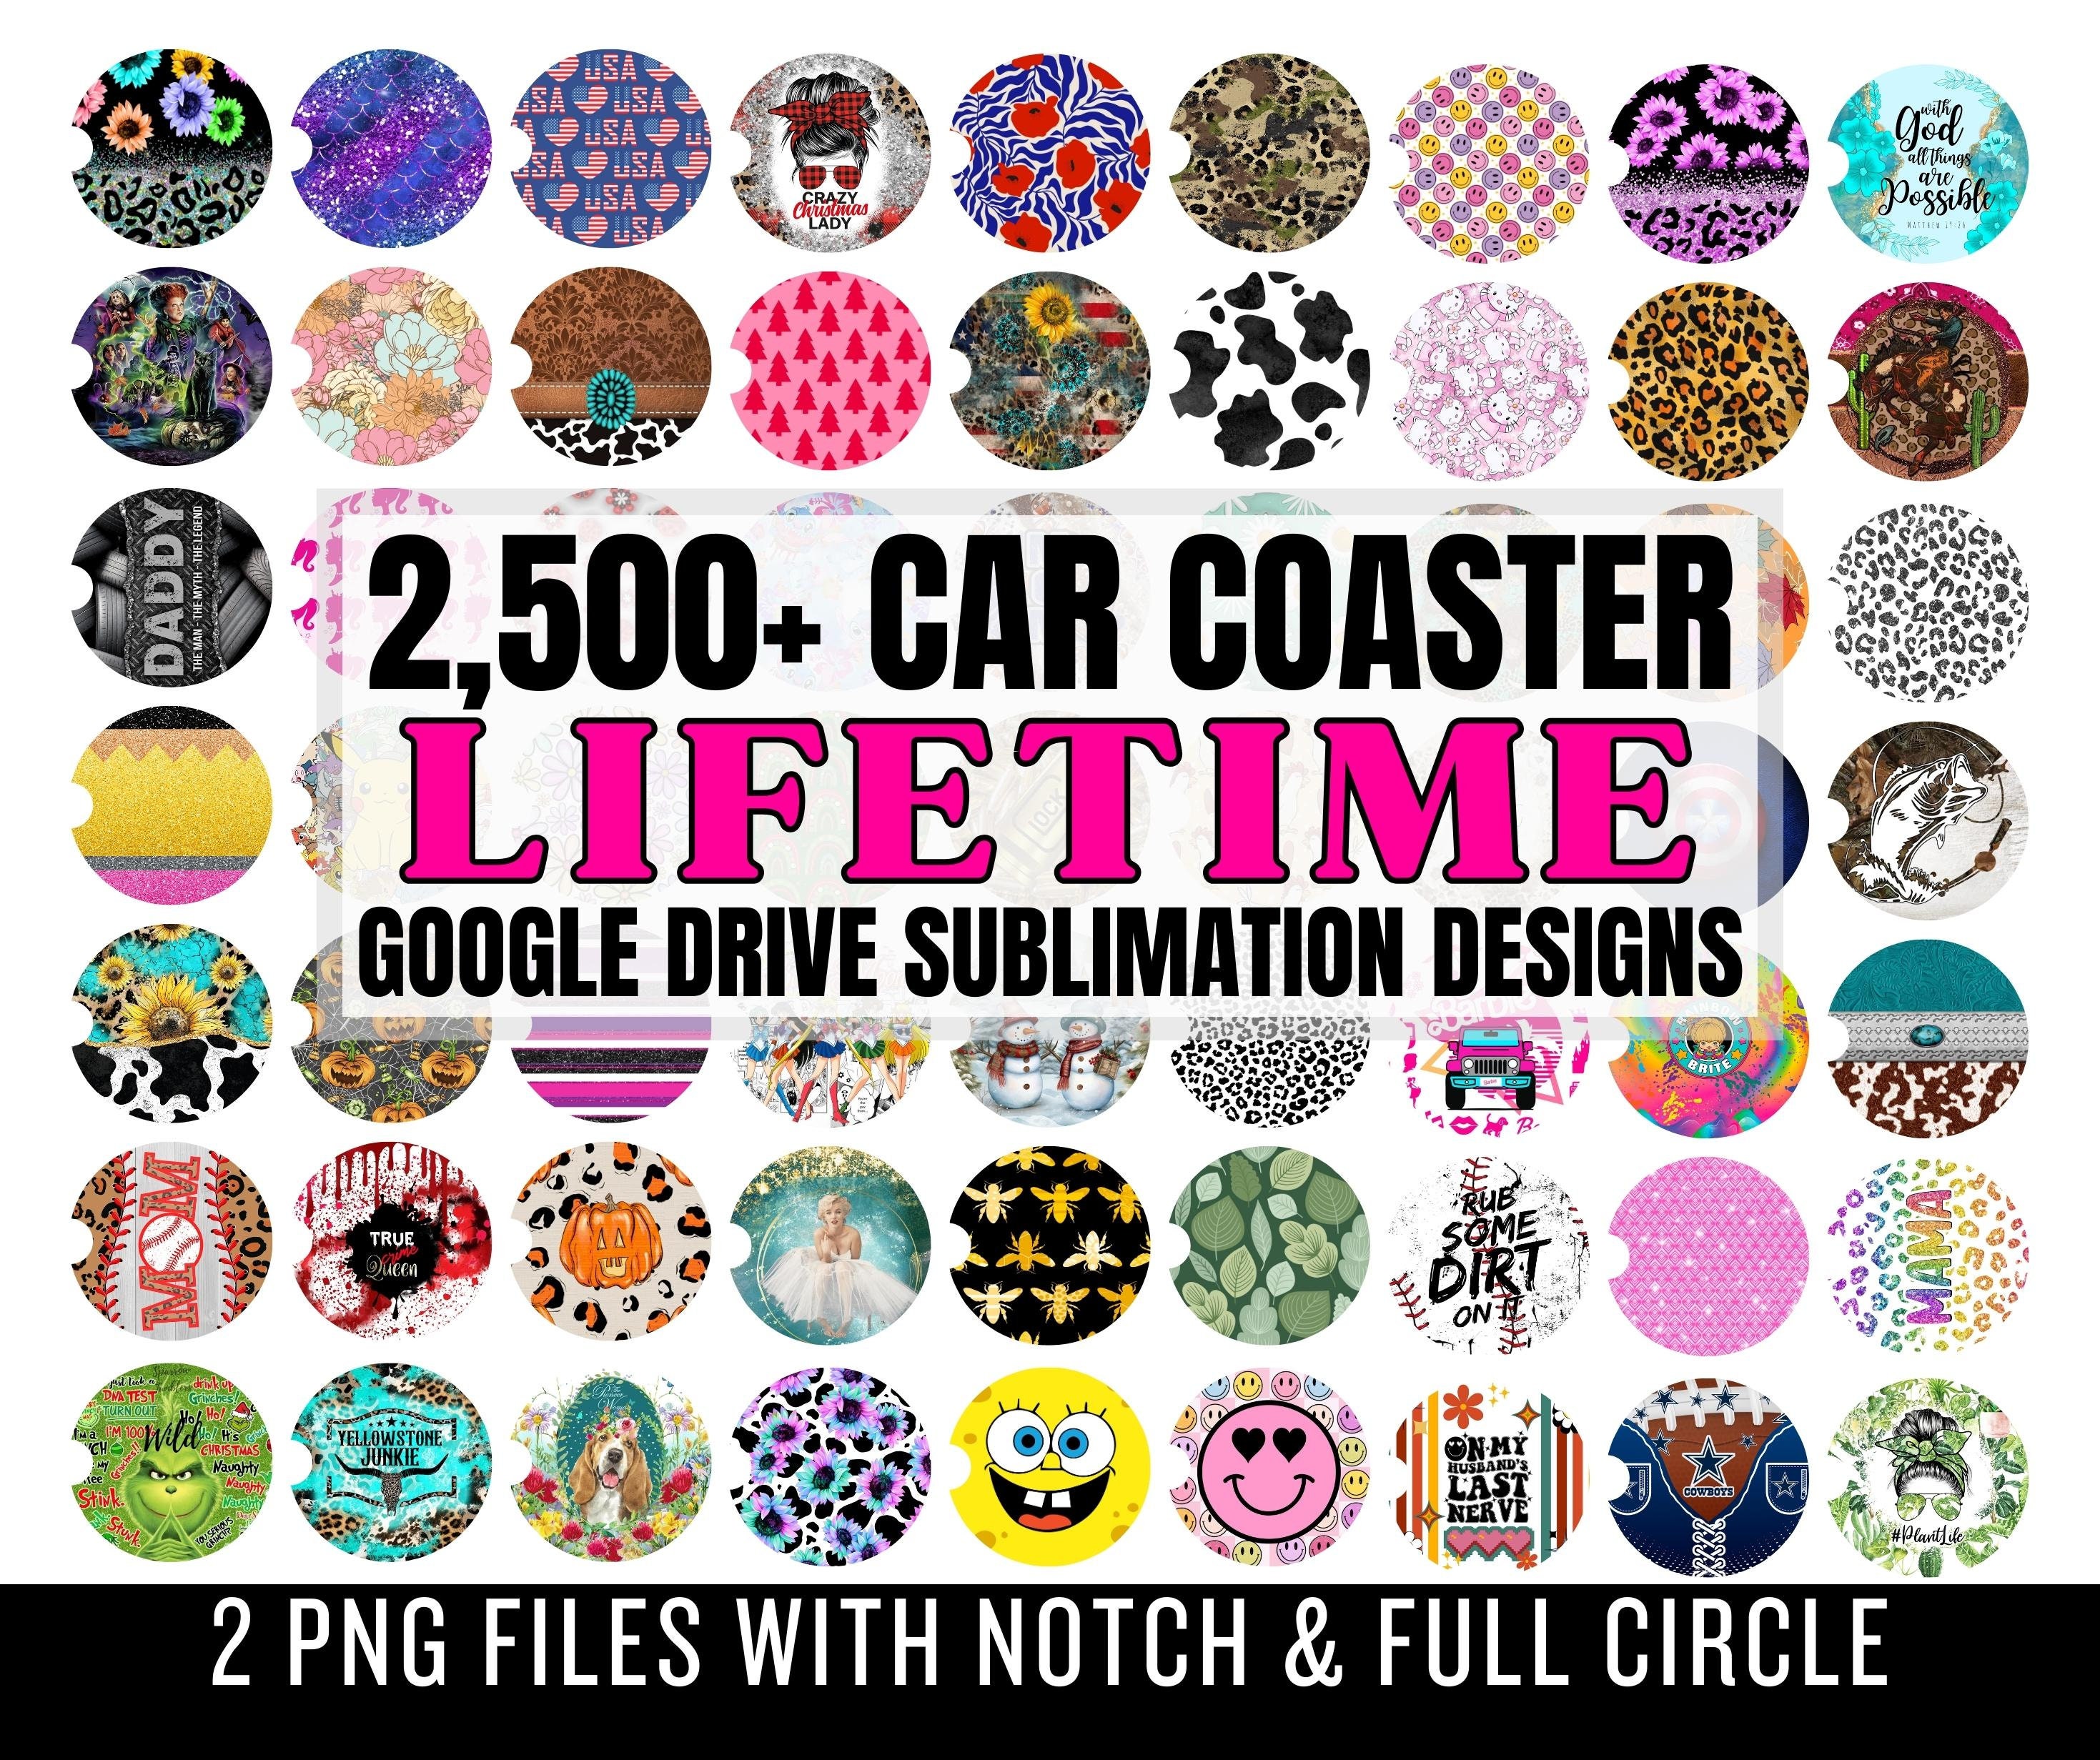 100Pcs Car Coaster Packaging For Selling, Sublimation Car Coasters Cards  With 100Pcs Bags, Sublimation Parts - AliExpress